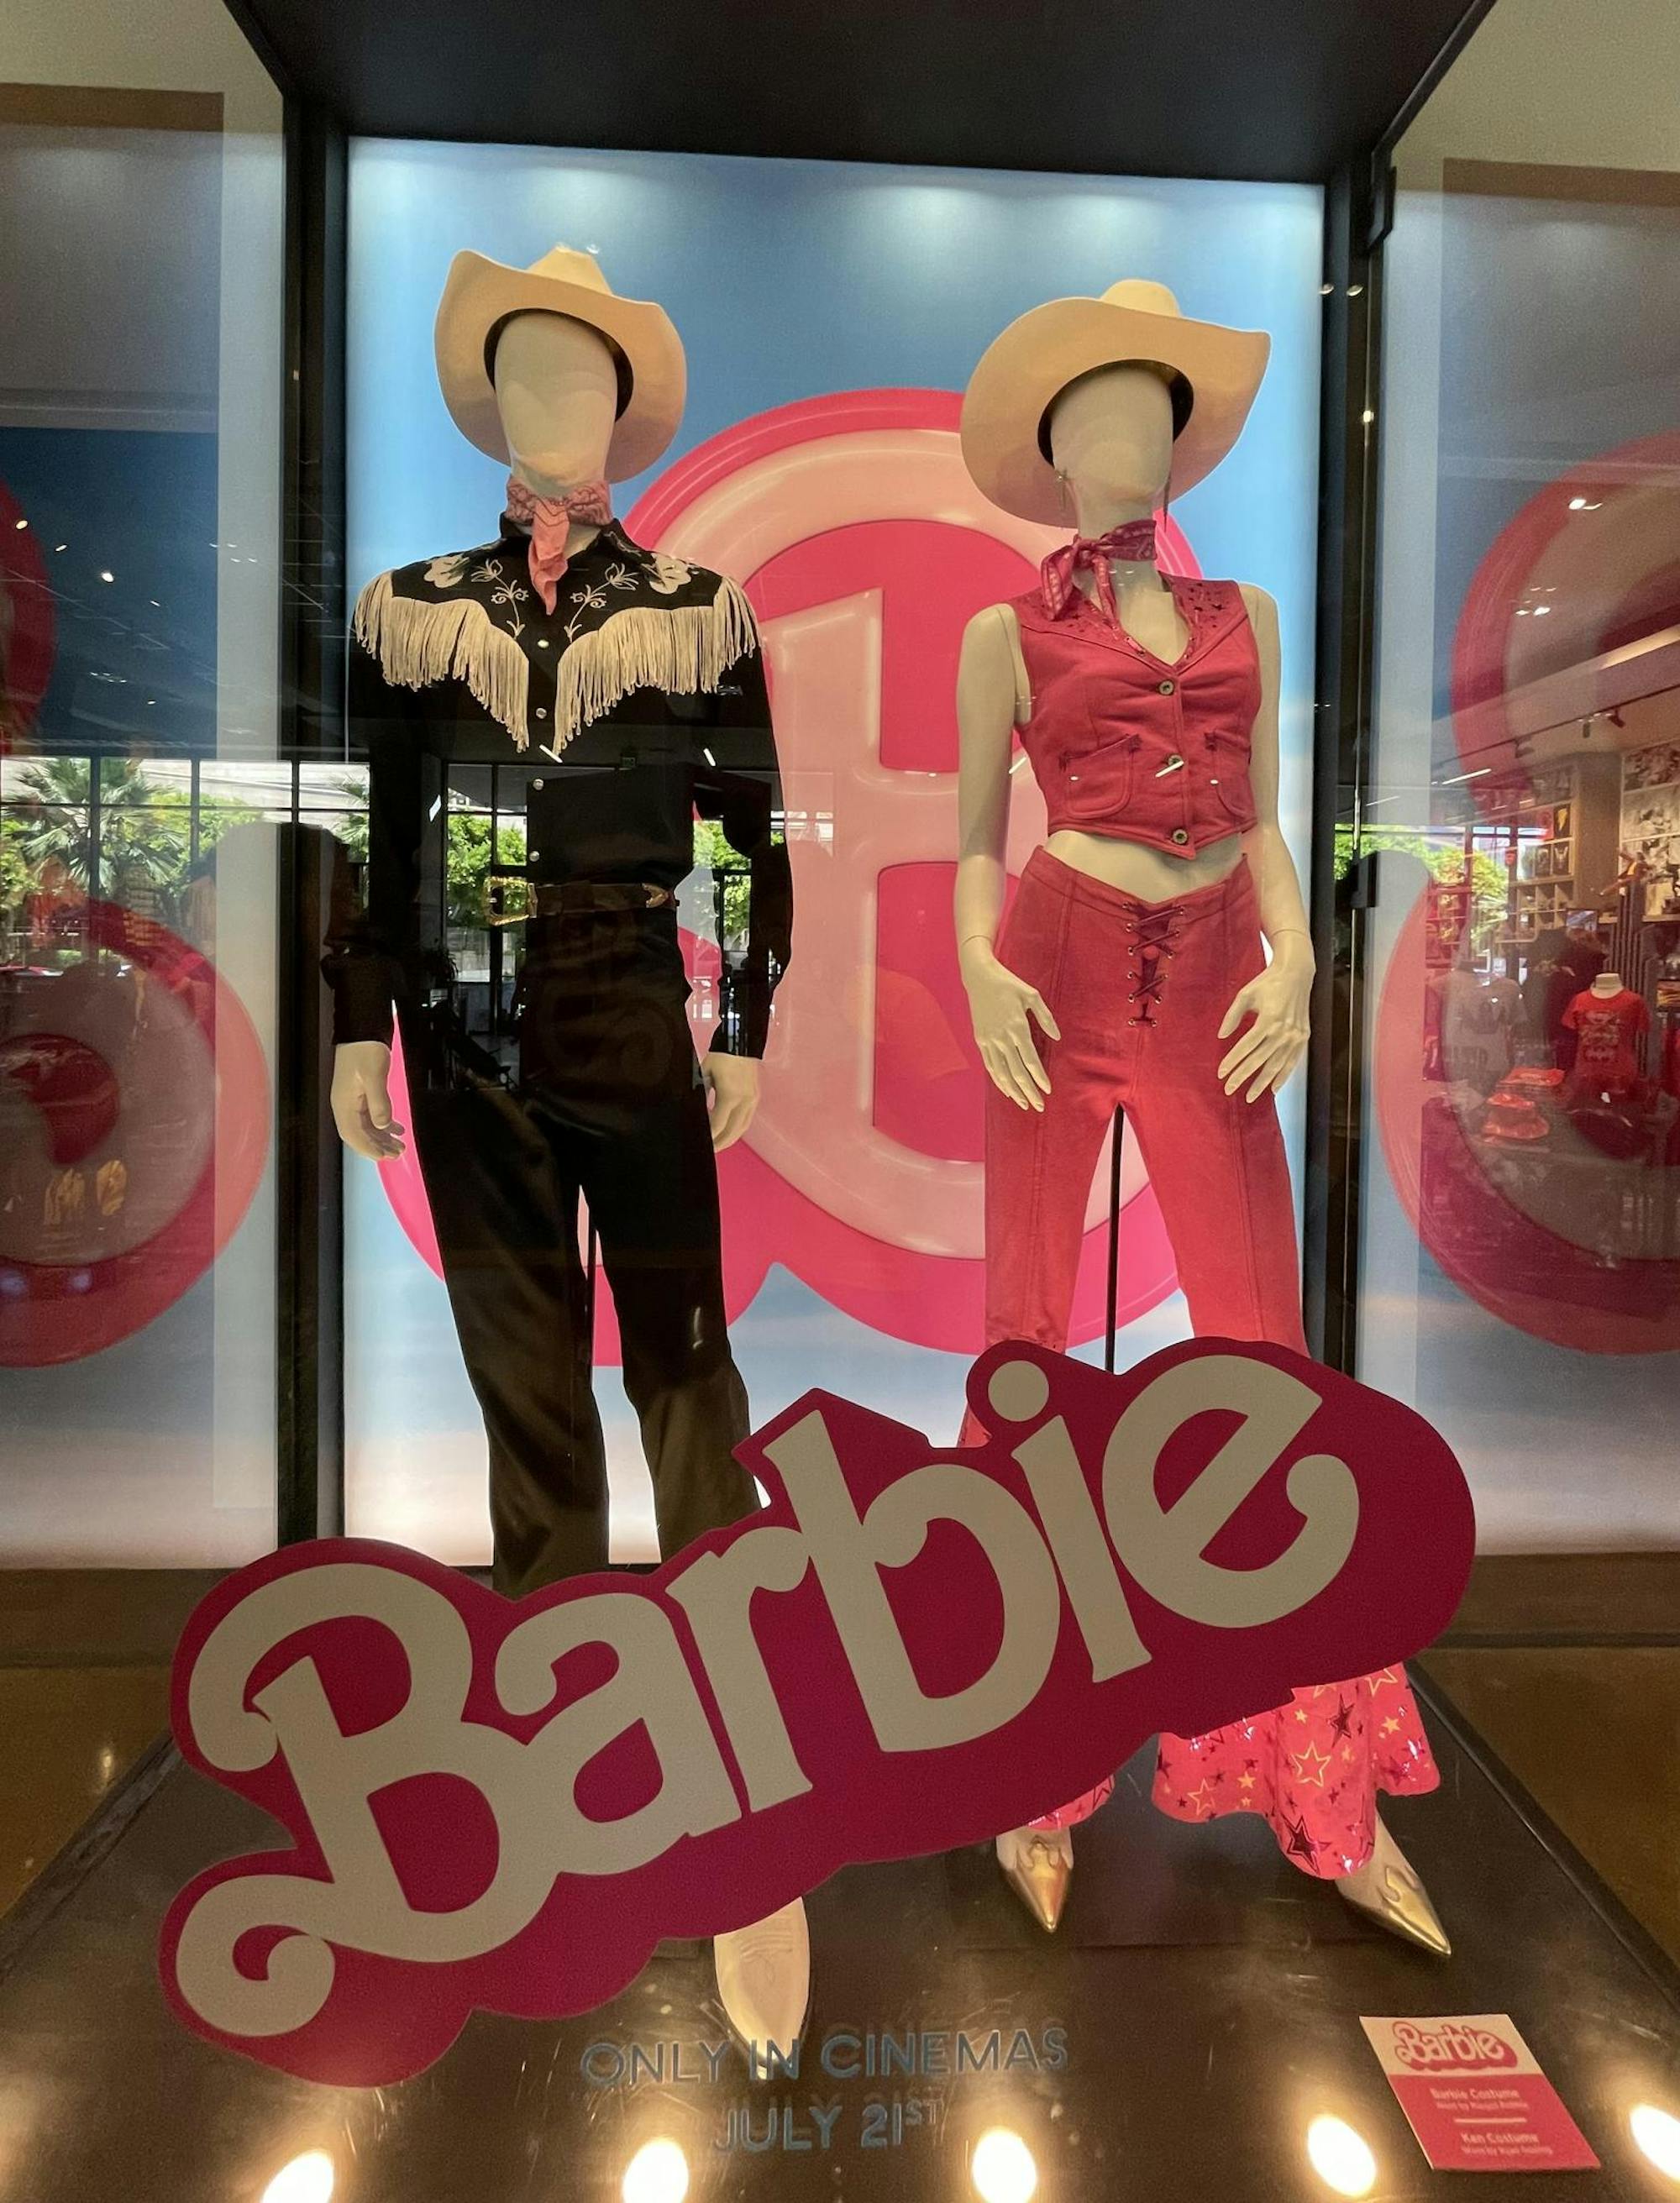 Two mannequins, one in a black outfit and one in a pink pant and shirt combo, are posed behind a Barbie display case.